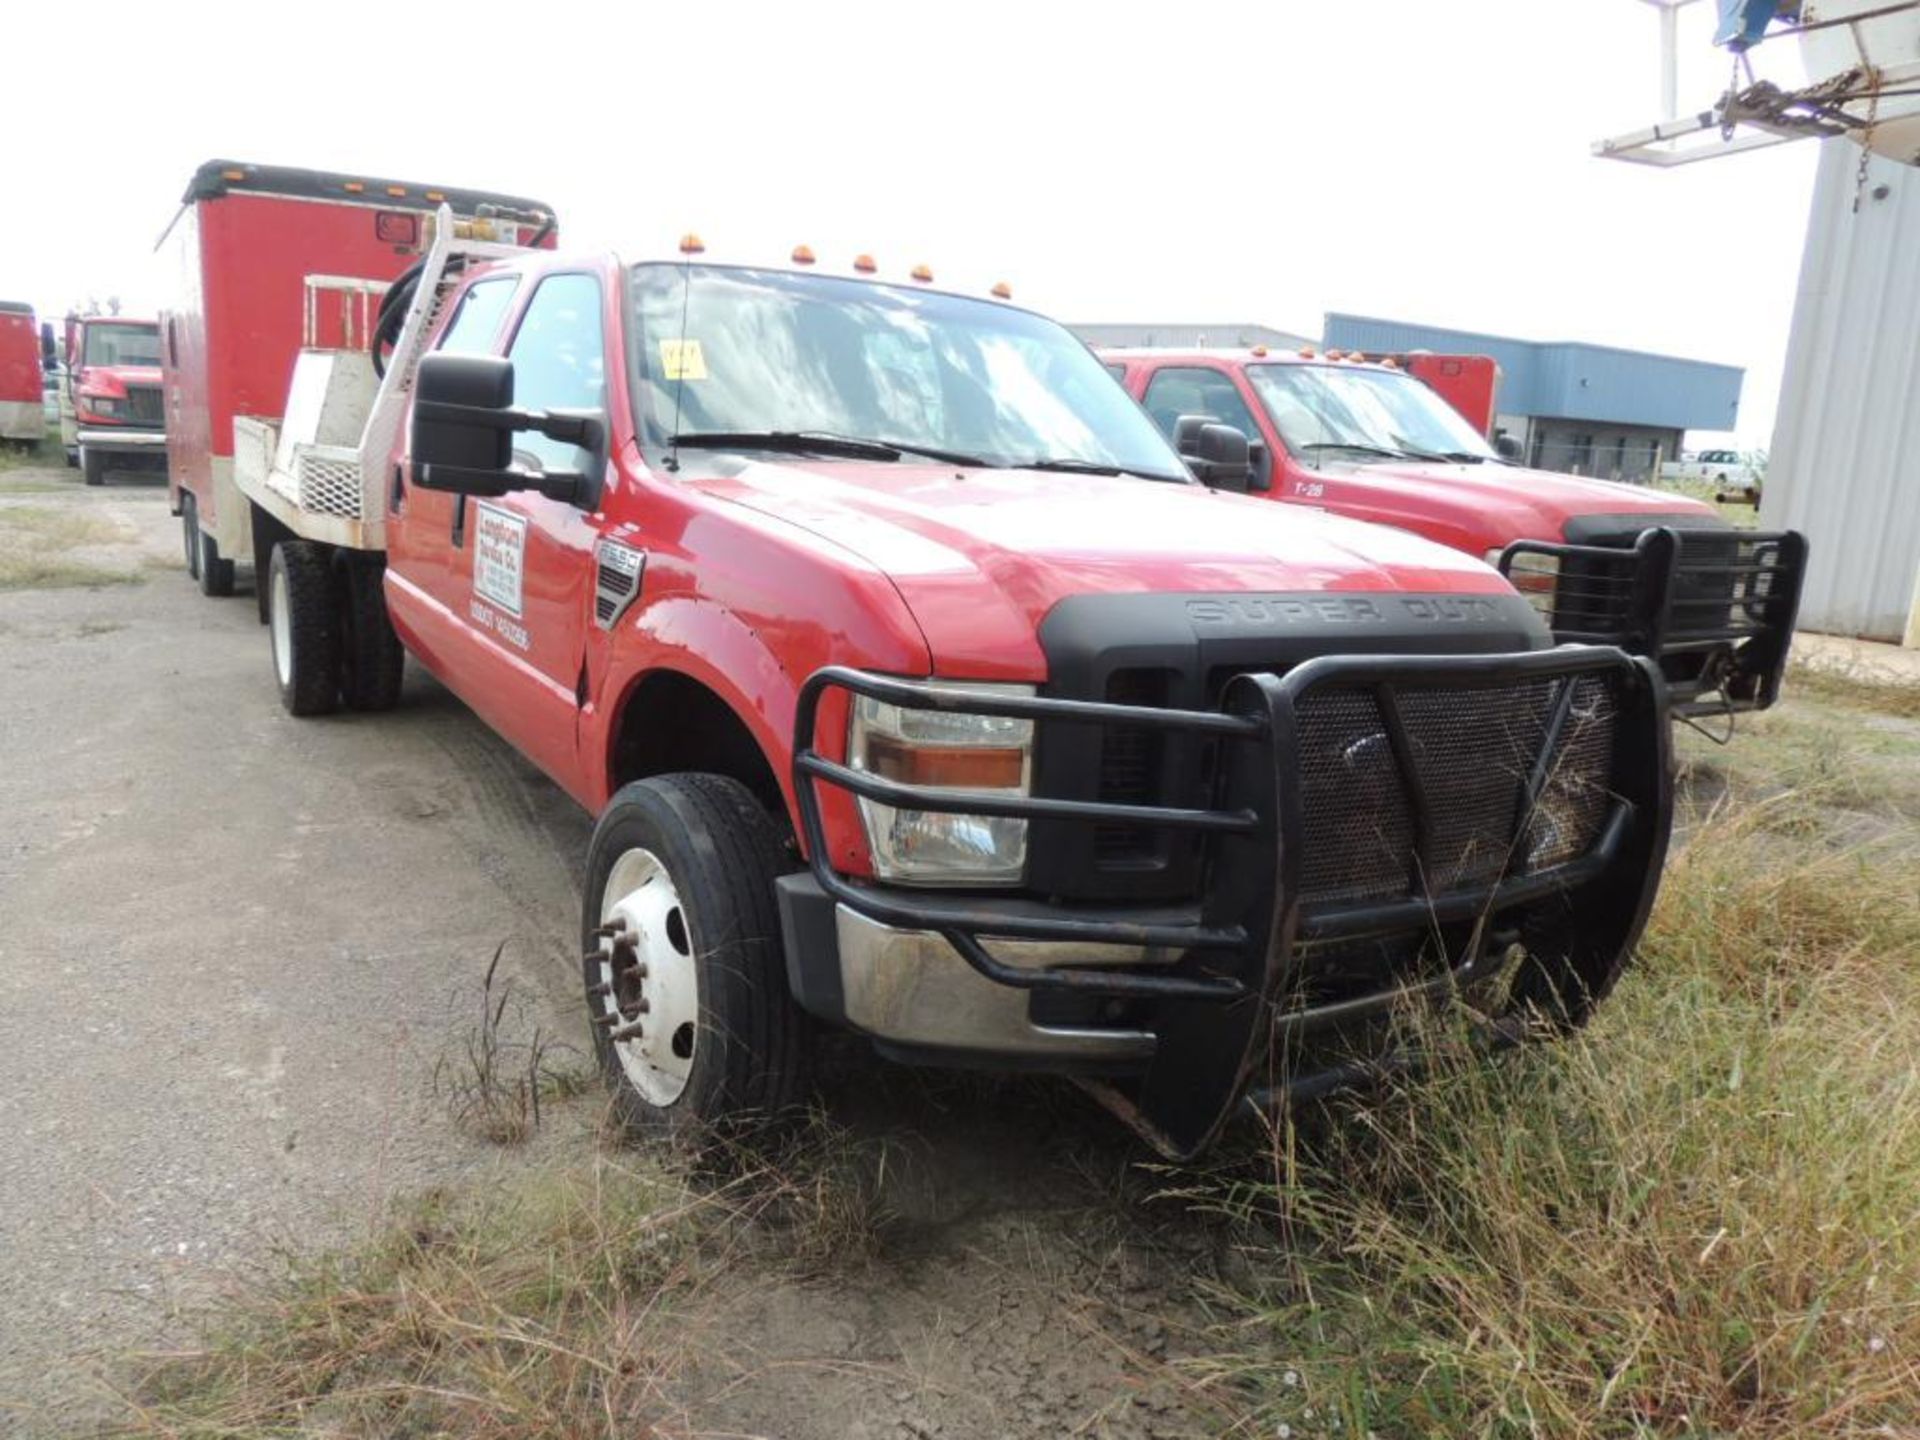 2008 Ford F550 XL SD Crew Cab 4x2, 9 Ft. Flat Bed, 6.4 Power Stroke, Auto Trans, Vin # 1FDAW56R28EA4 - Image 2 of 4